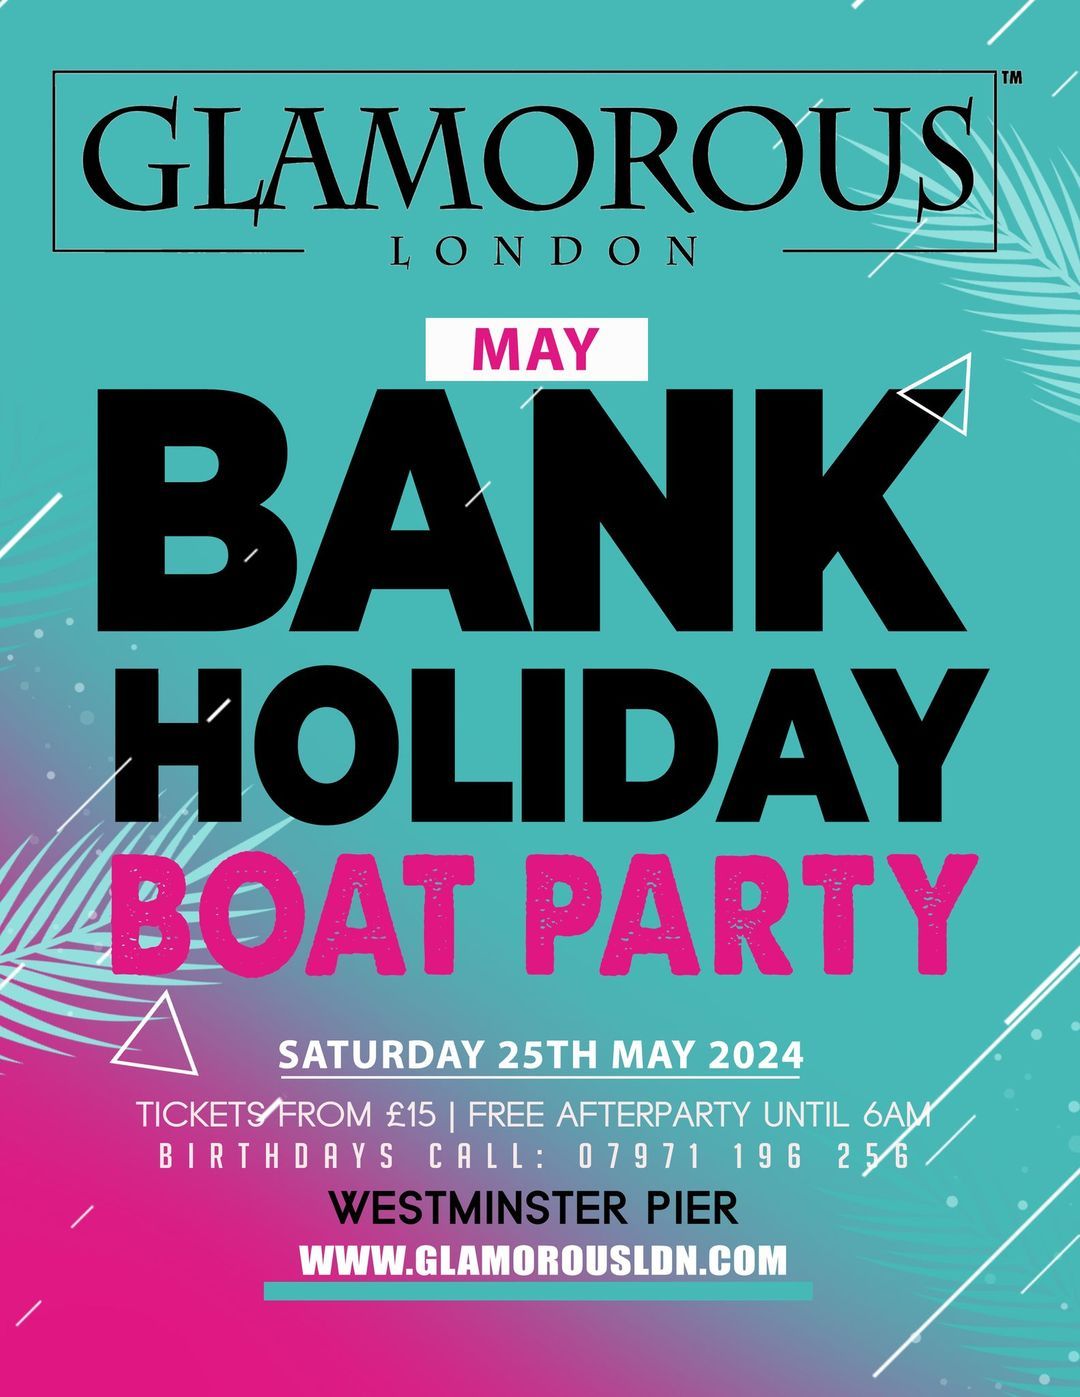 Glamorous Boat Party & After Party at Egg